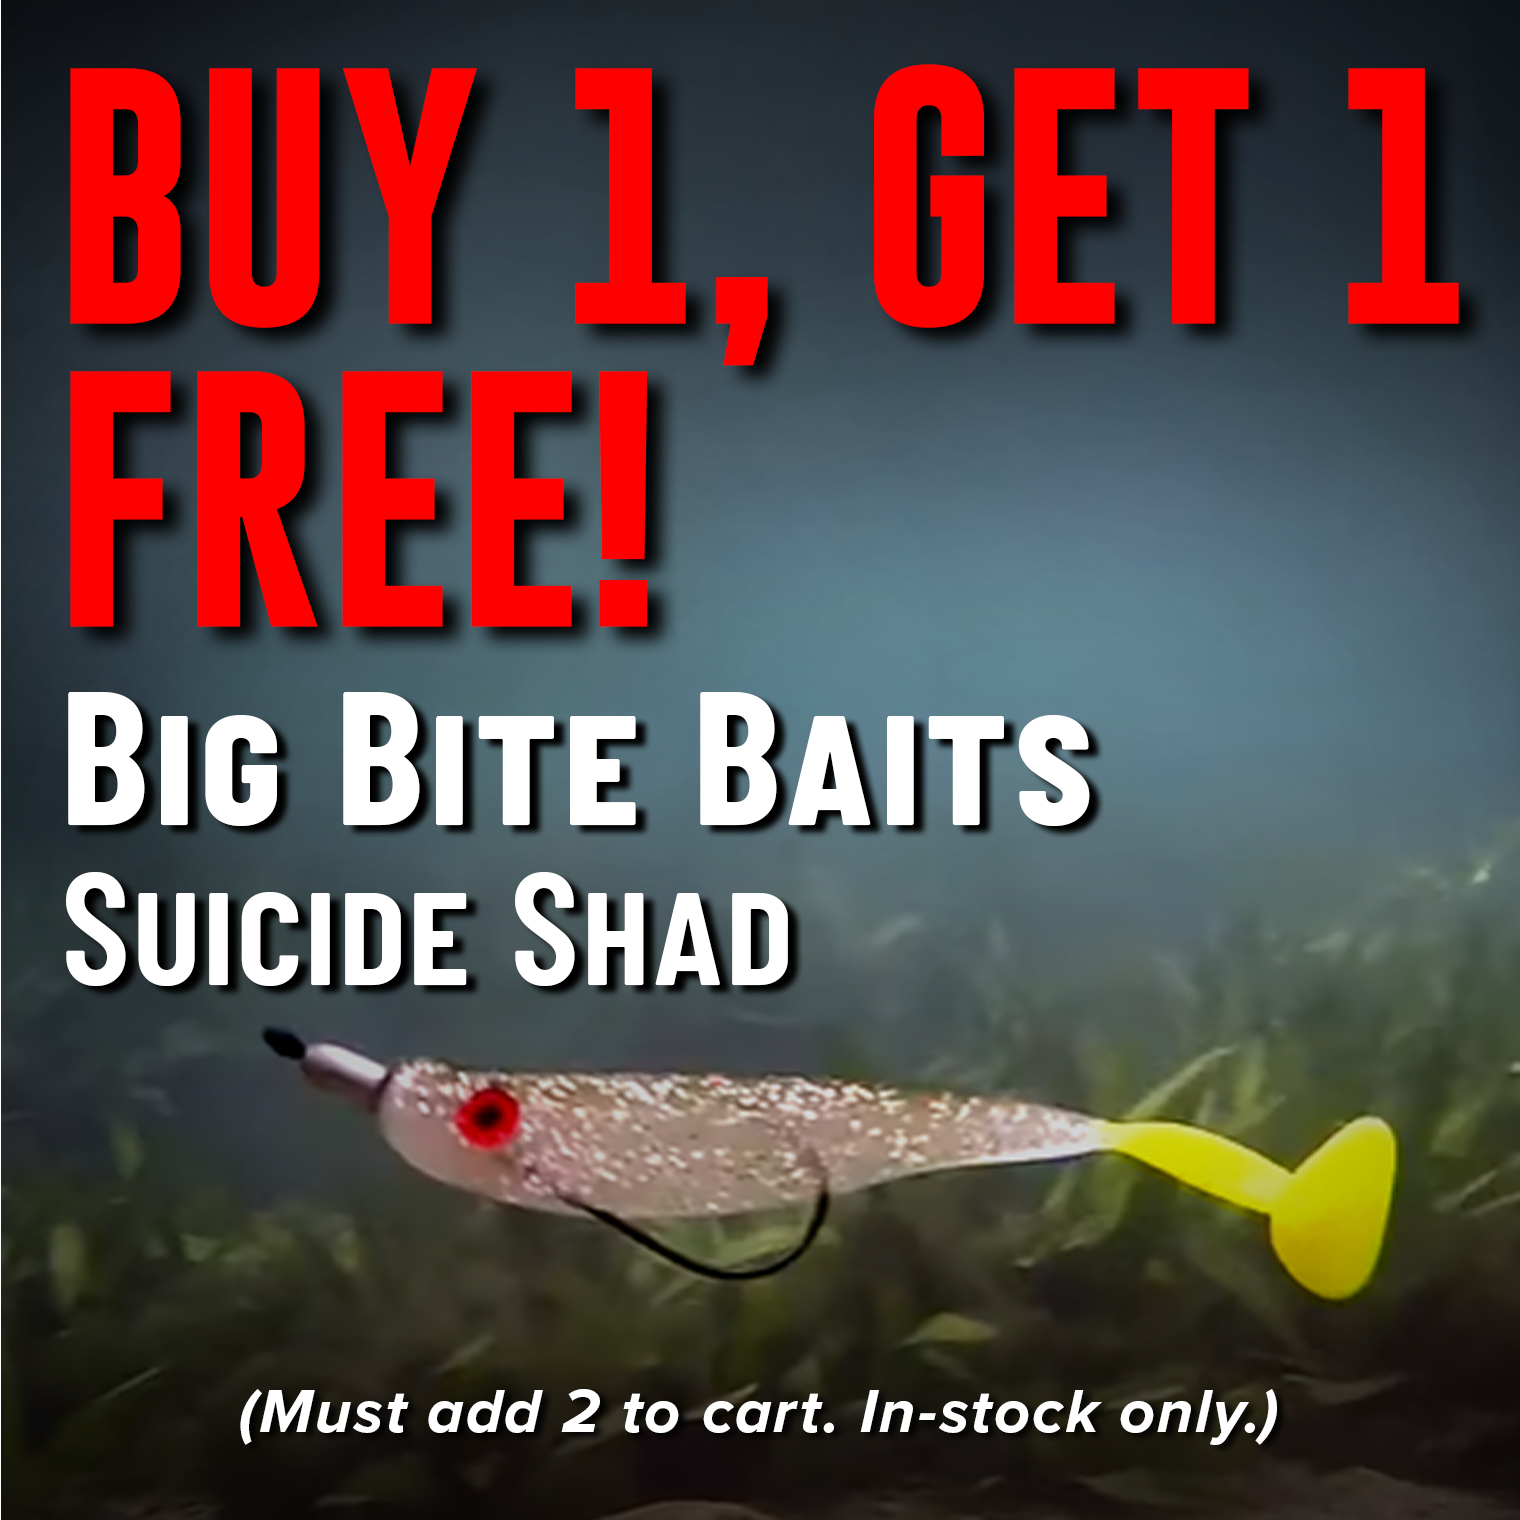 Buy 1, Get 1 Free! Big Bite Baits Suicide Shad (Must add 2 to cart. In-stock only.)